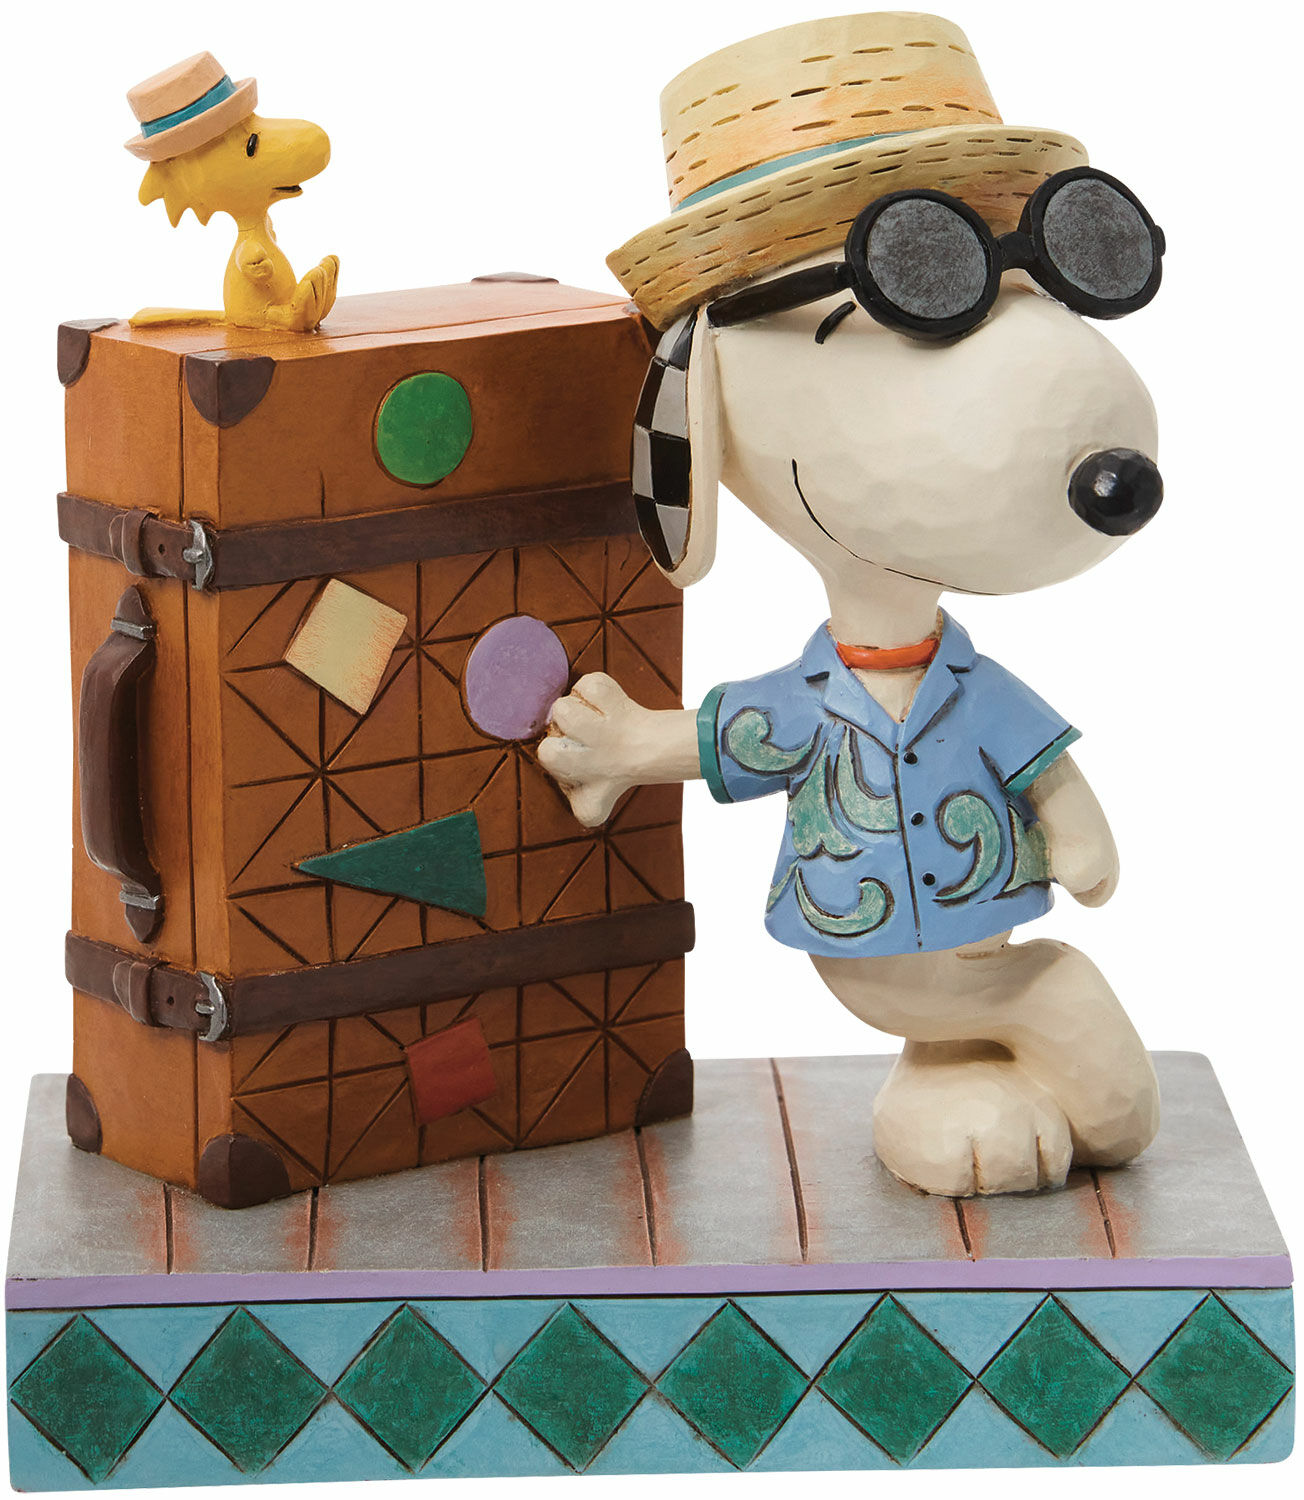 Sculpture "Snoopy and Woodstock Travelling", cast by Jim Shore